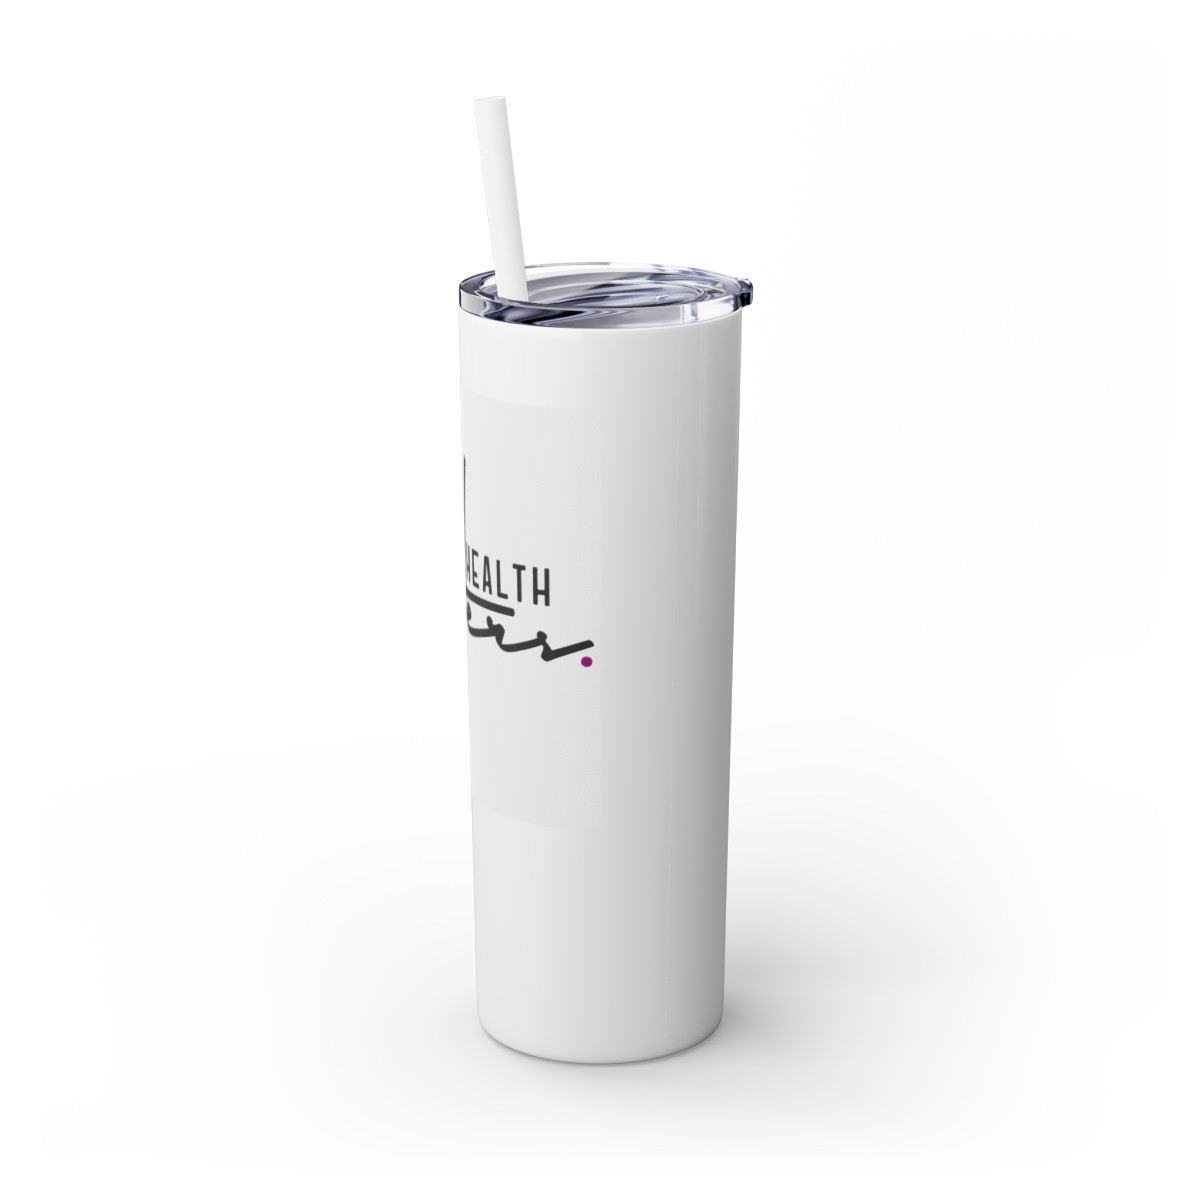 Mental Health Matters Skinny Tumbler with Straw, 20oz product thumbnail image